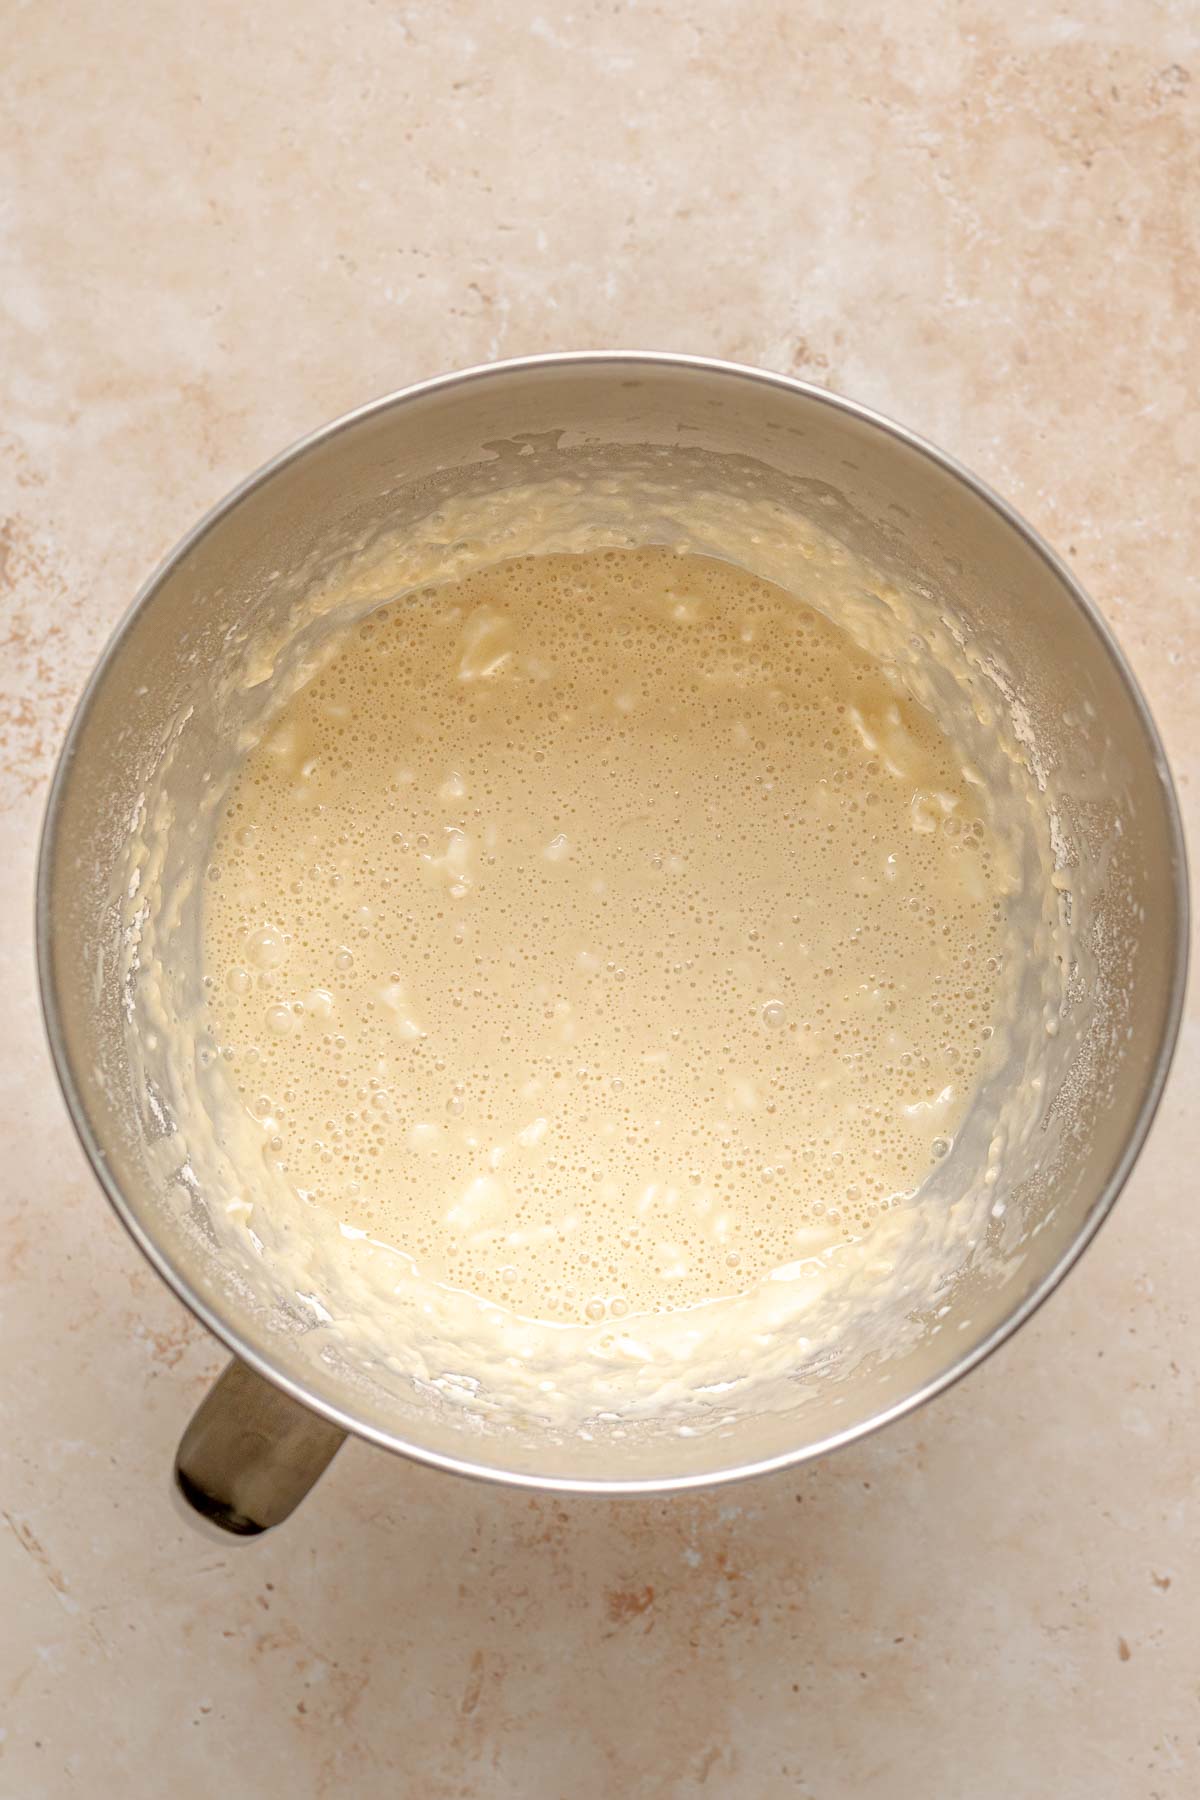 Yeast Donut dough after adding wet ingredients in bowl